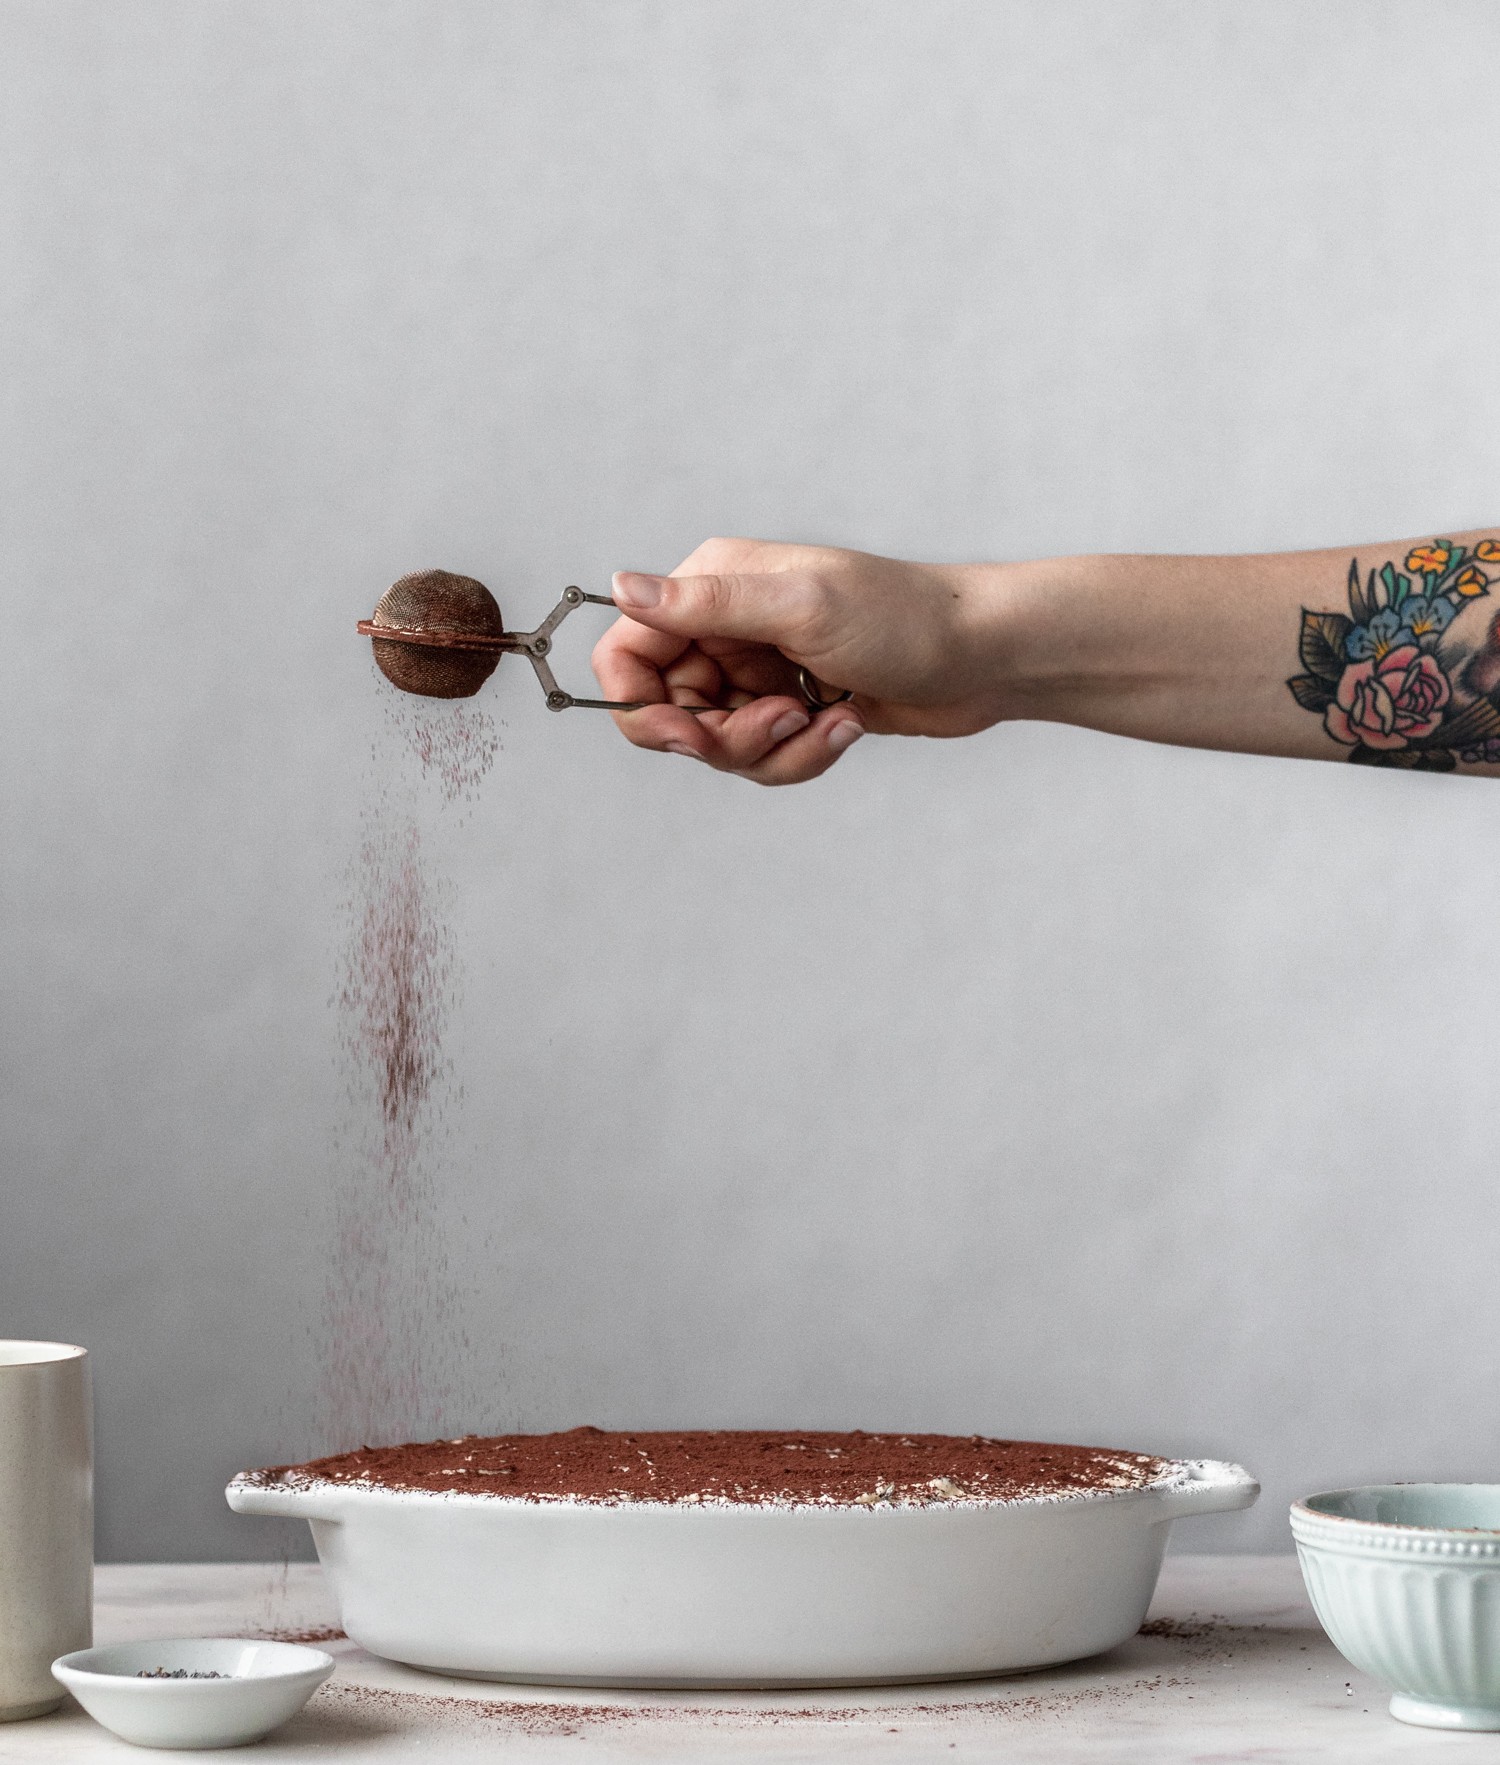 A woman's arm dusting cocoa powder over a white dish with London fog tiramisu with a white background.